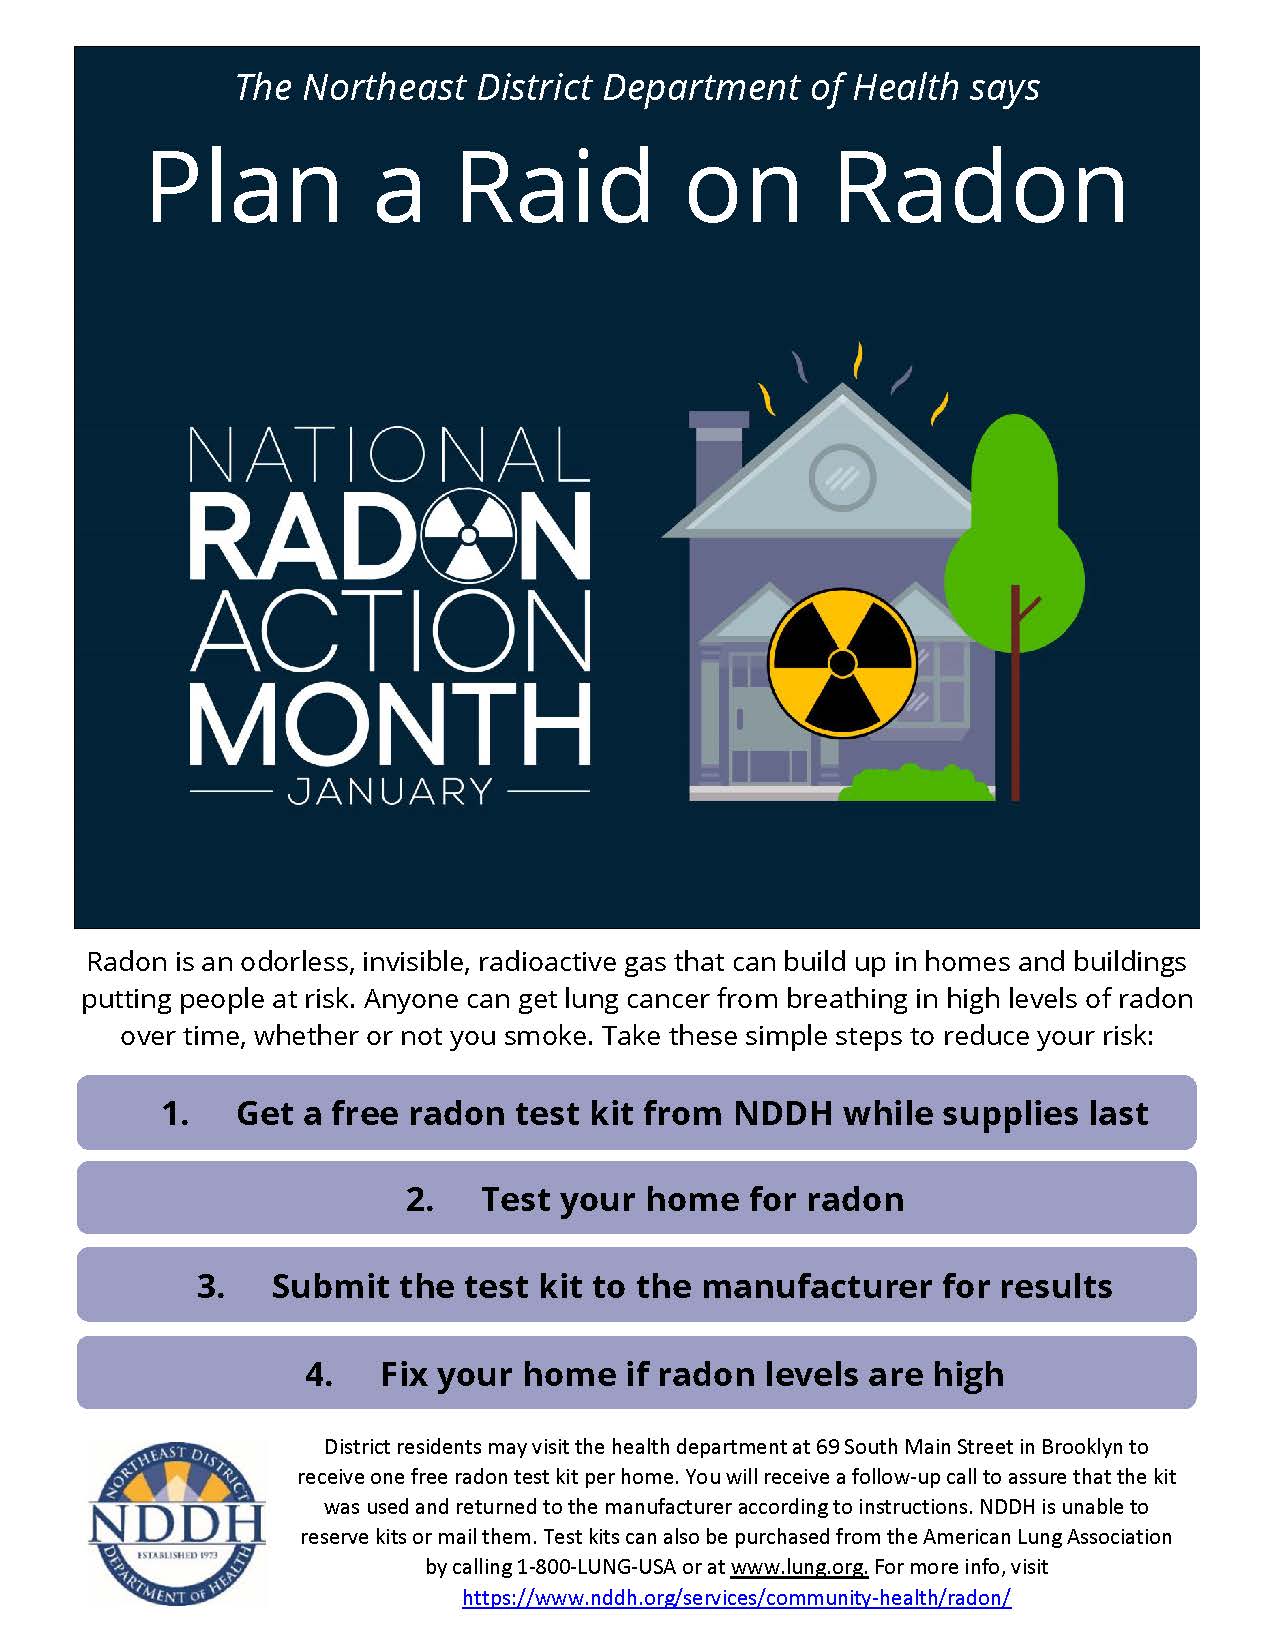 How To Detect Radon Gas Inside Your Home, According To Experts